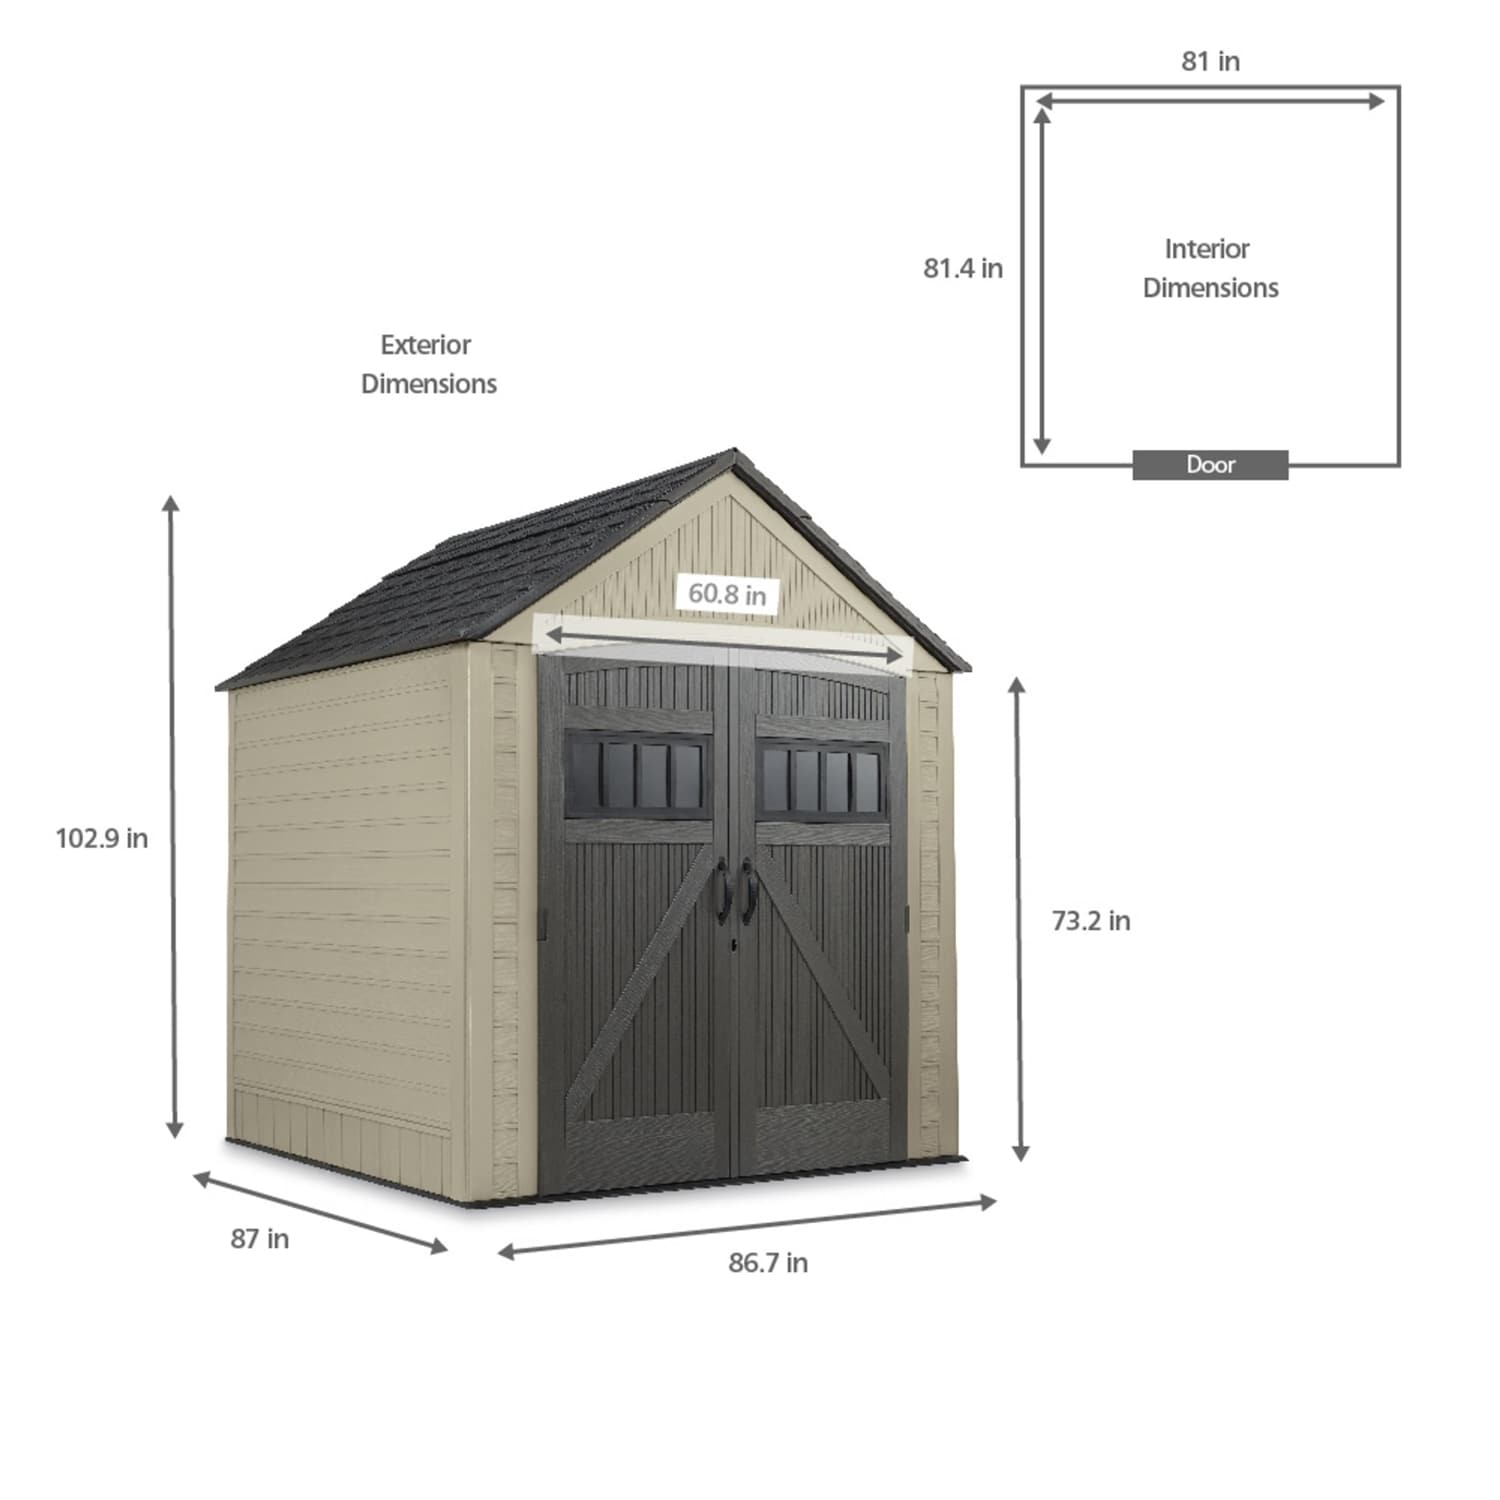 Rubbermaid Roughneck Modular Large Vertical Outdoor Storage Shed - RHP3673  